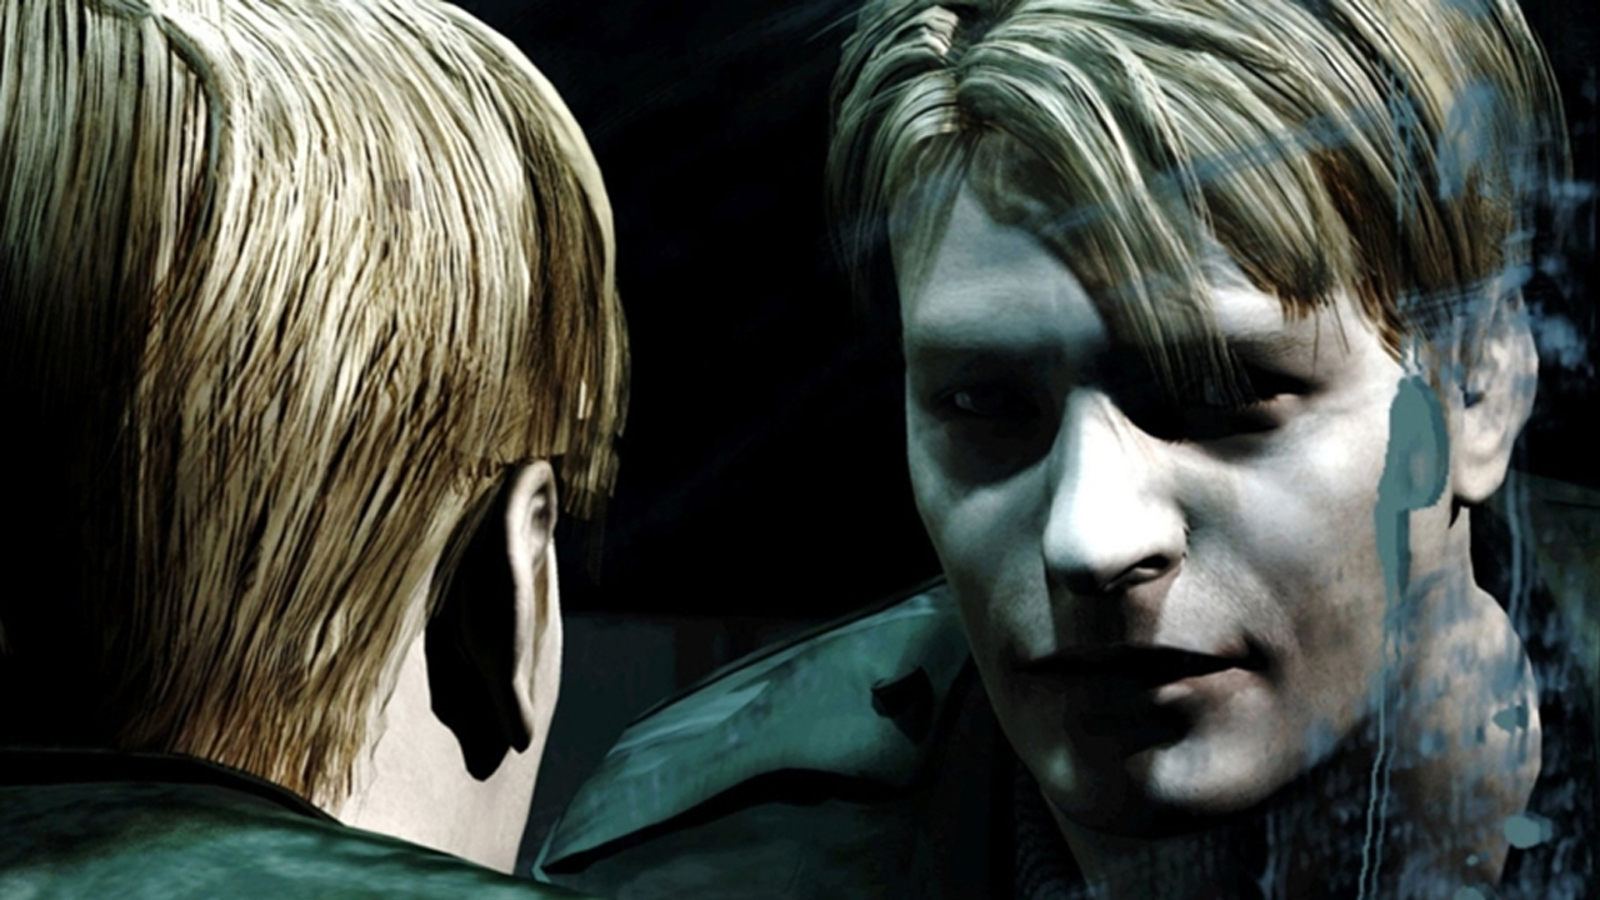 Silent Hill 2: Director's Cut - PCGamingWiki PCGW - bugs, fixes, crashes,  mods, guides and improvements for every PC game